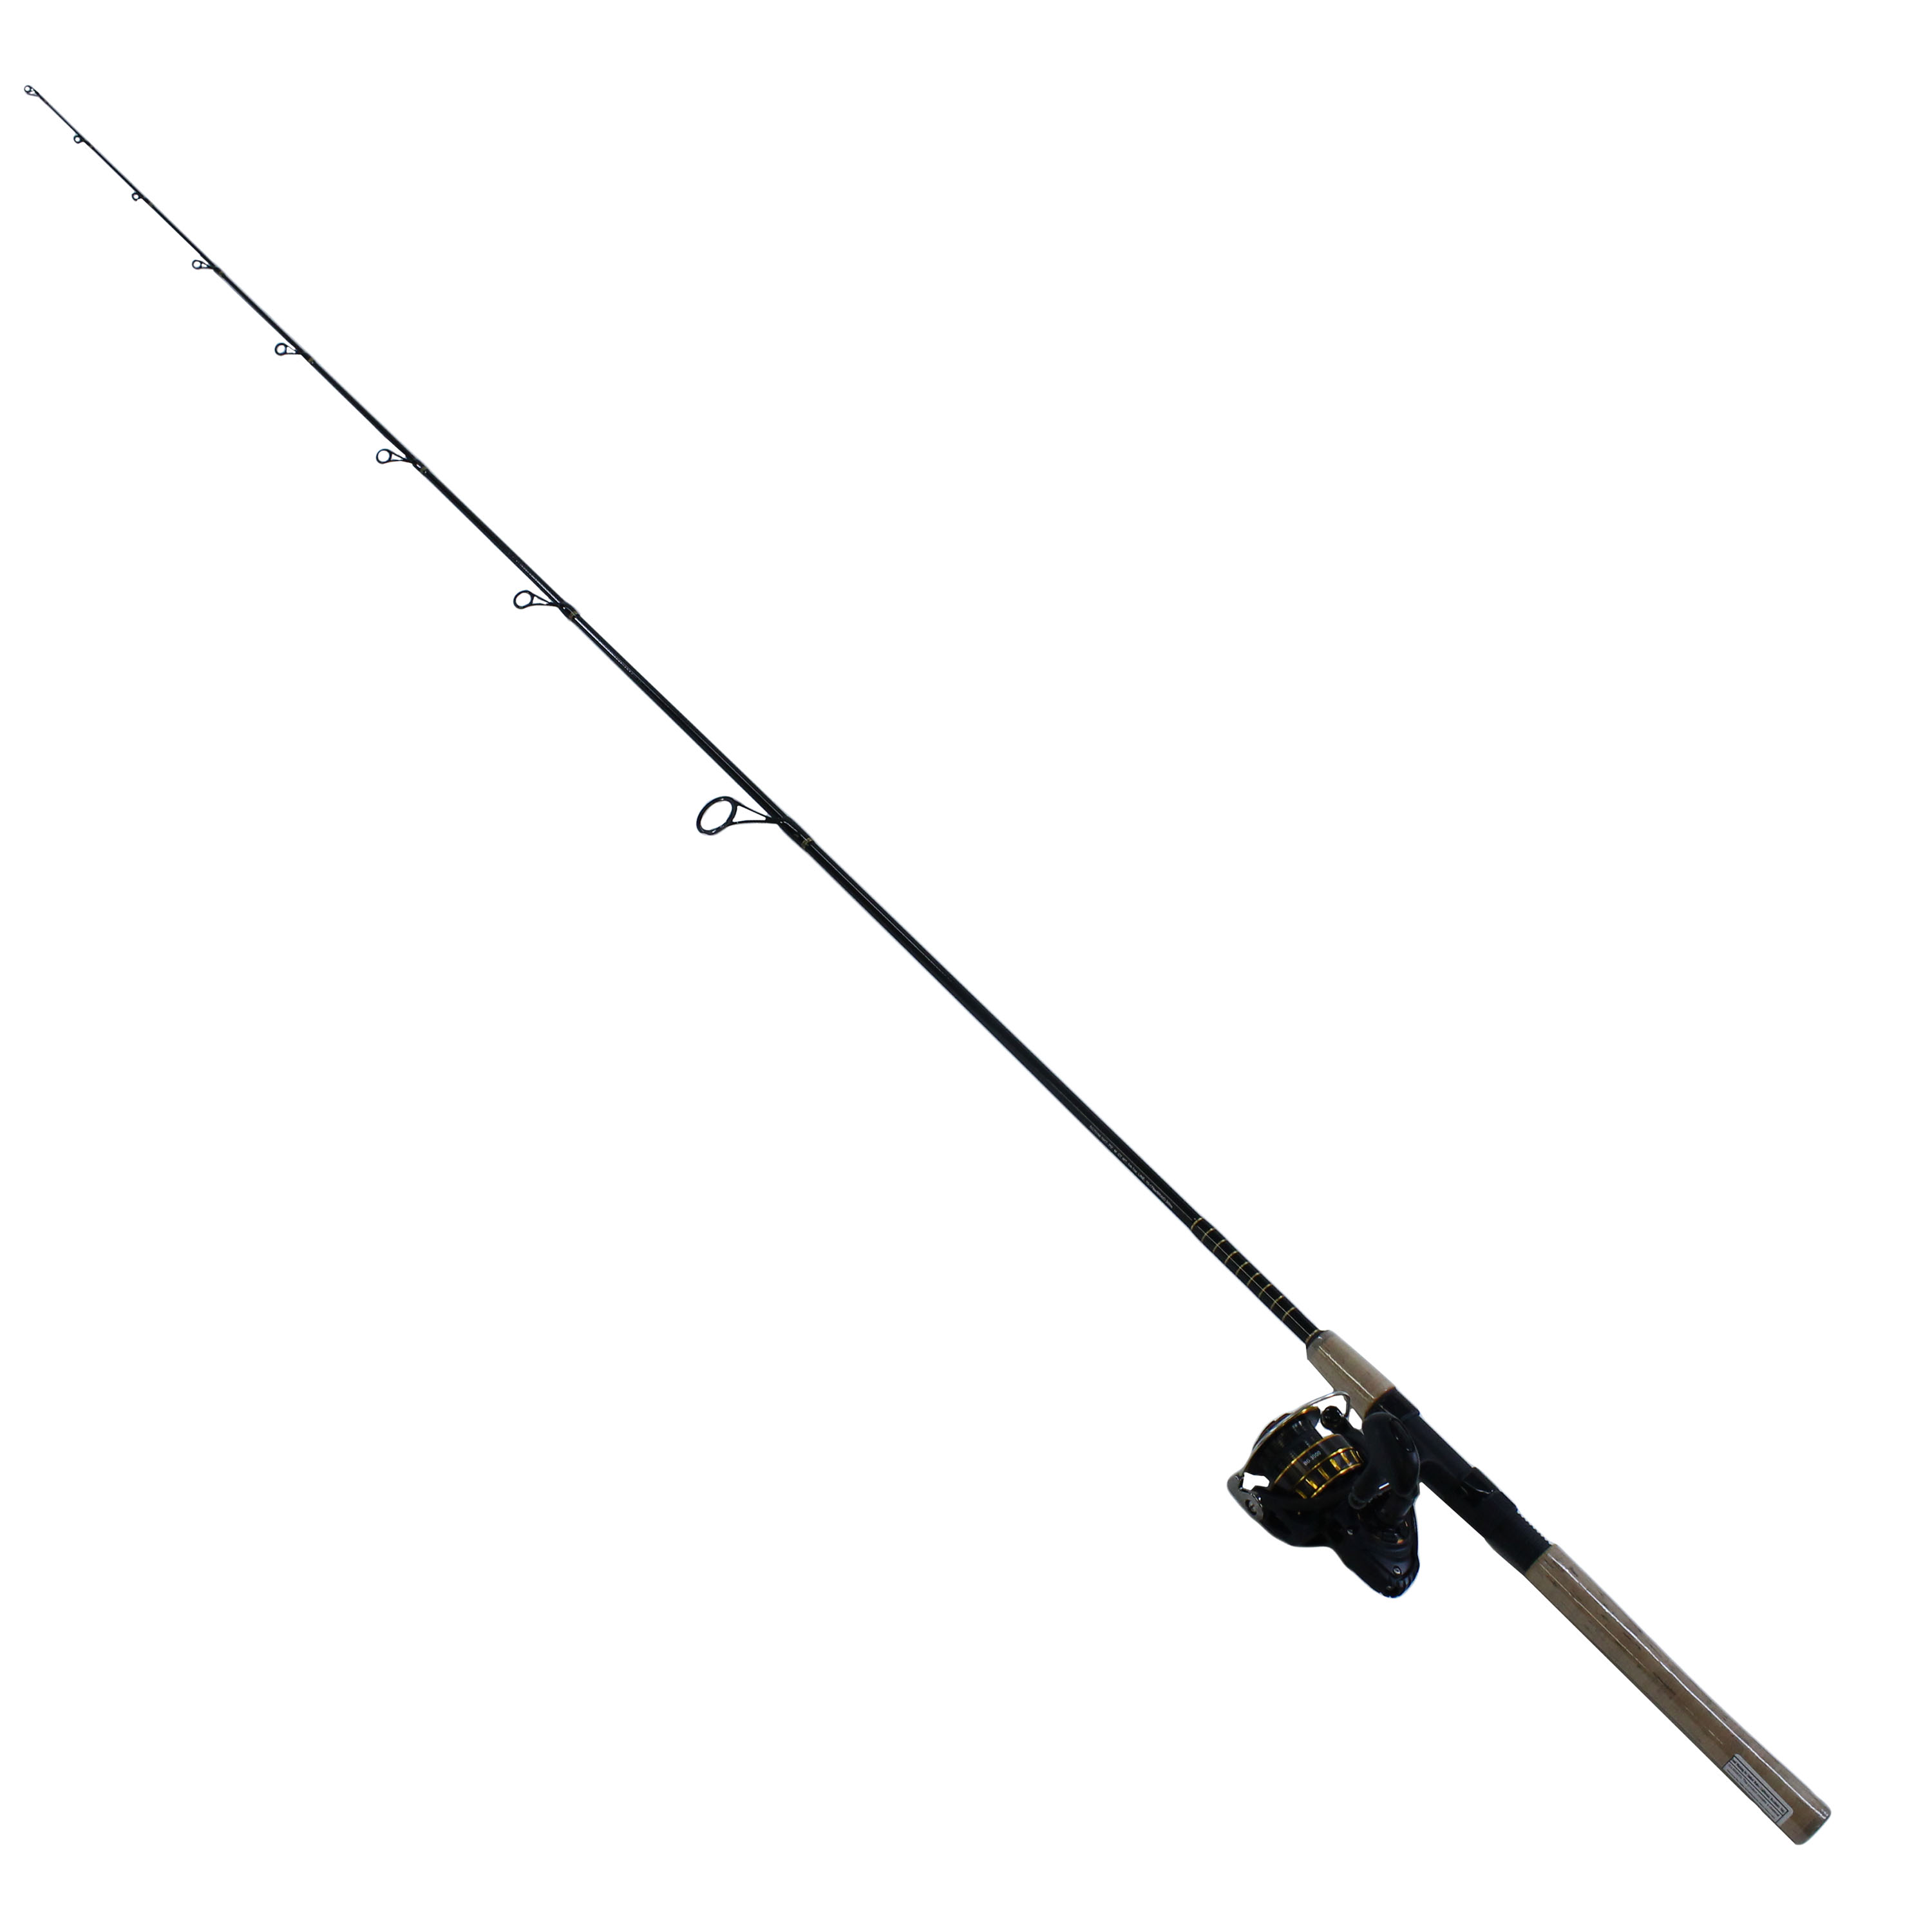 Daiwa BG 3000 Spinning Rod and Reel Combo  $12.04 Off w/ Free Shipping and  Handling